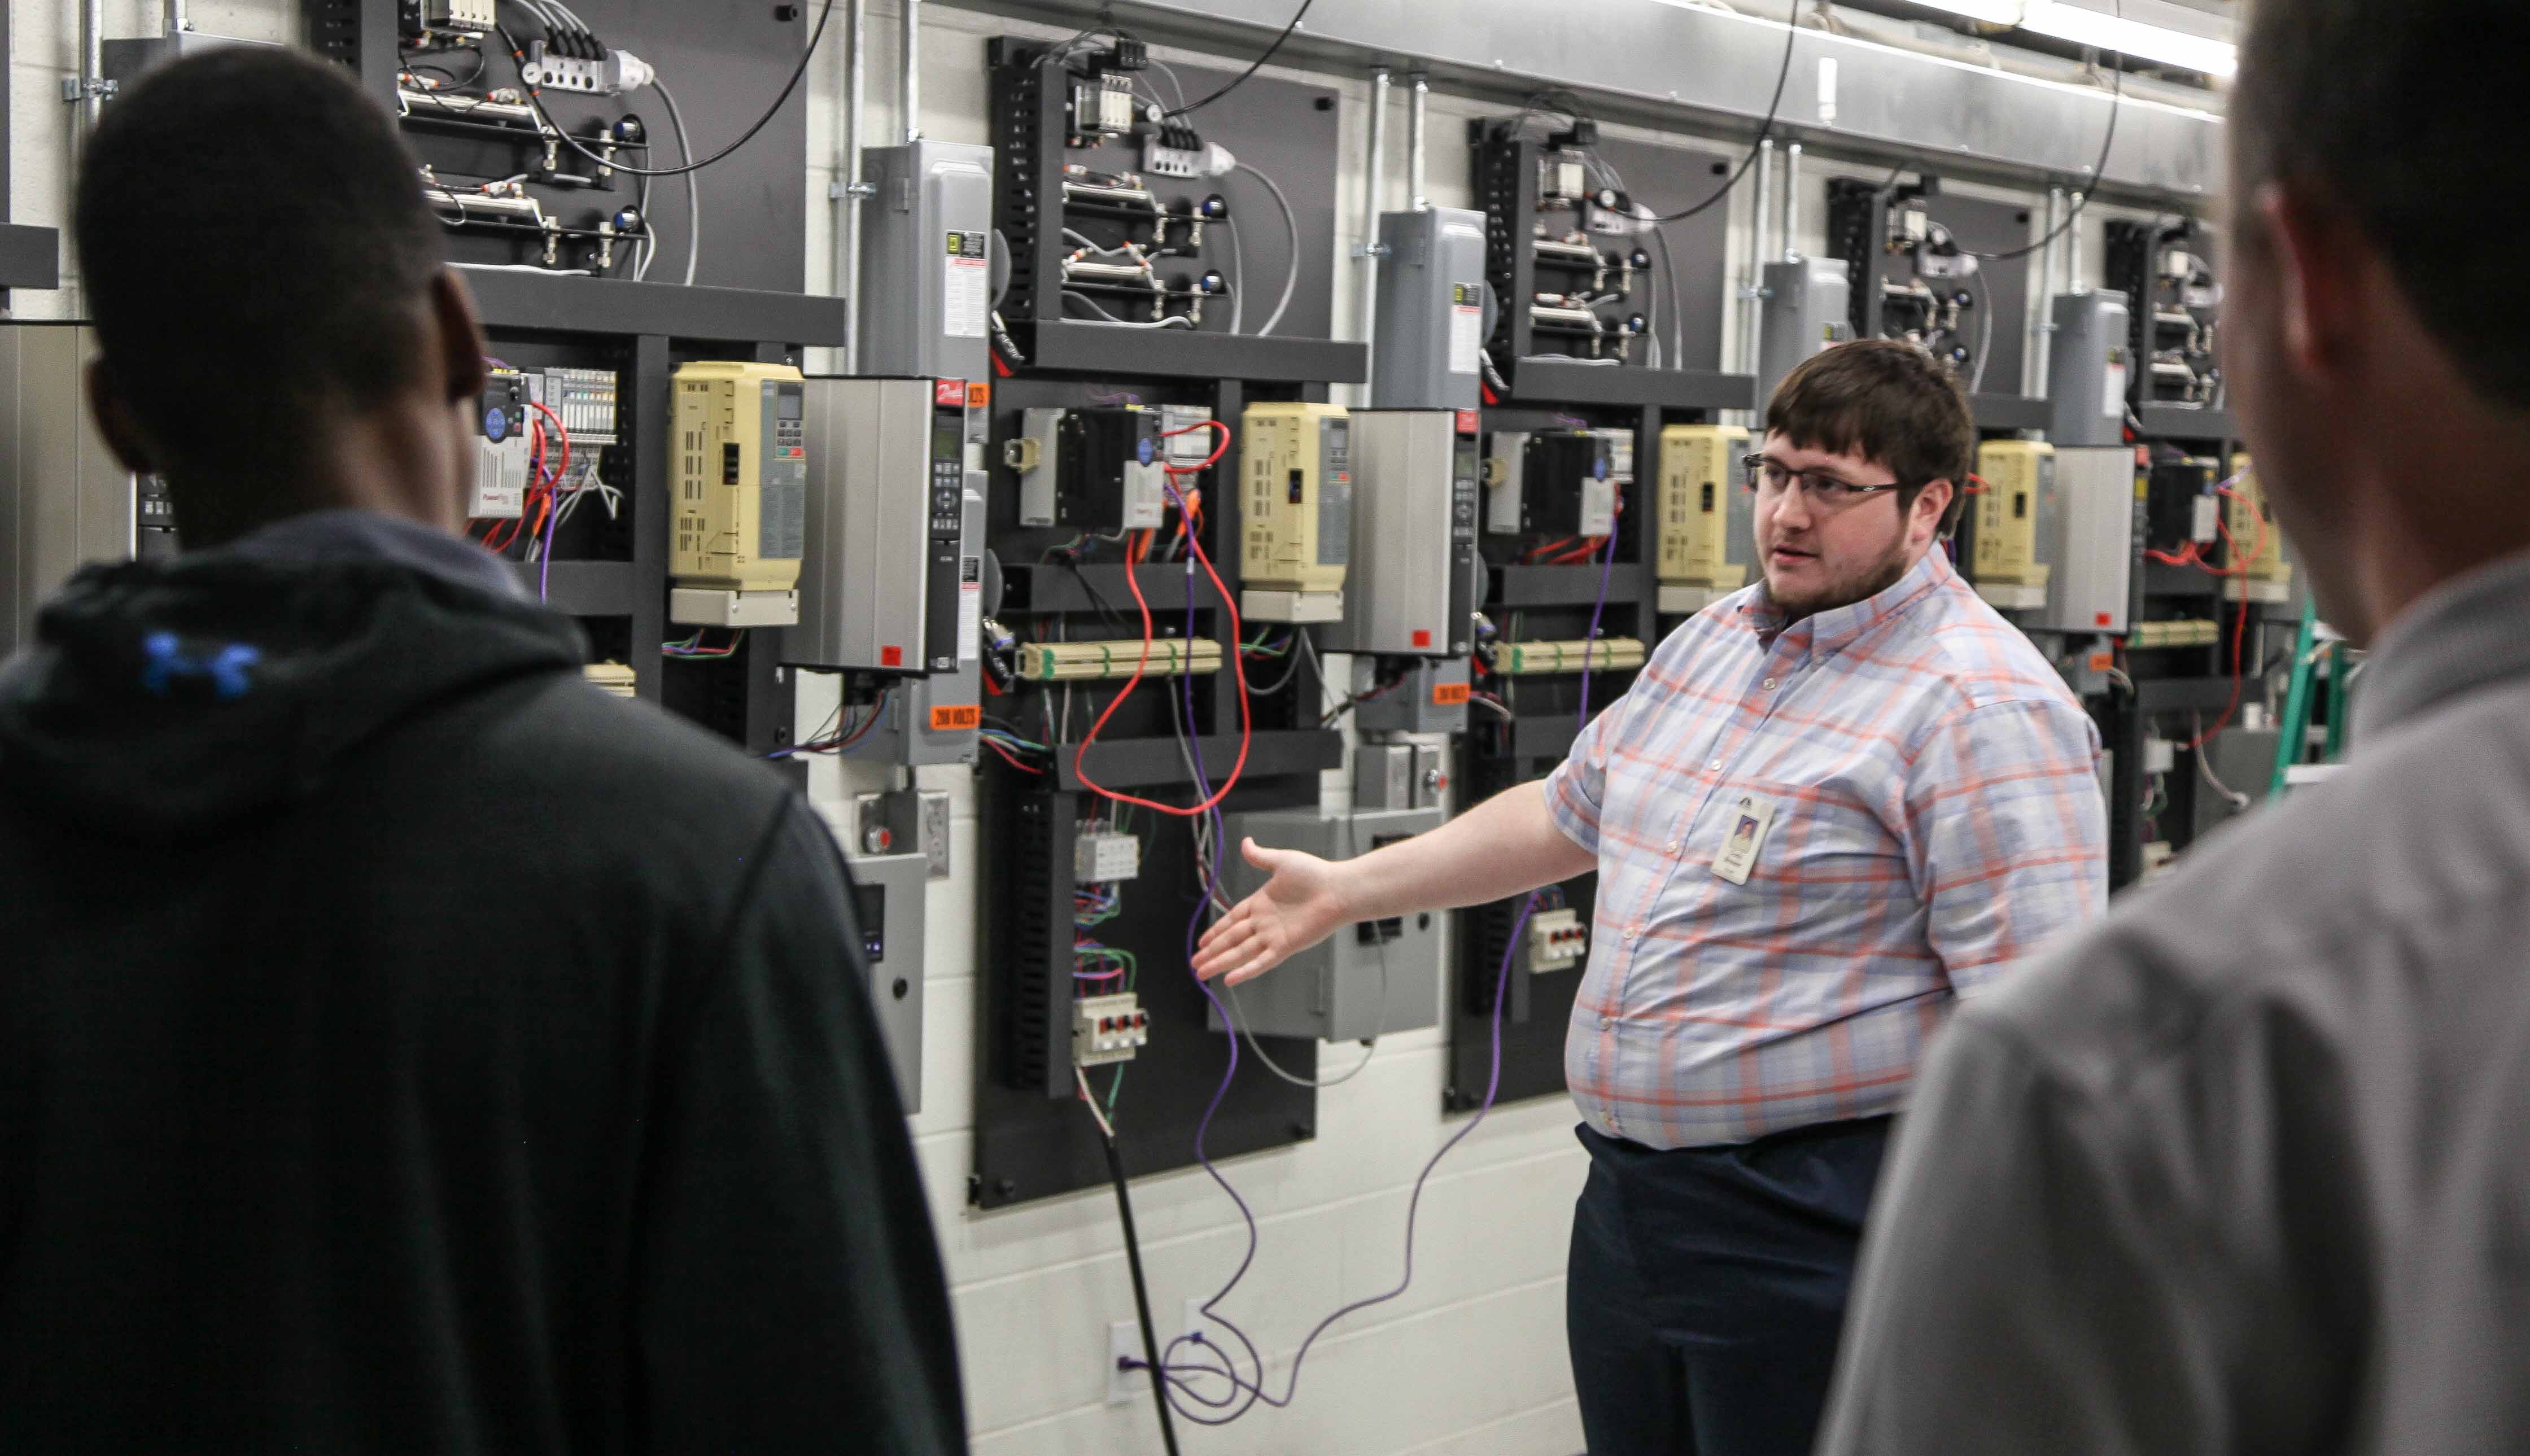 Georgia Northwestern Technical College Electronics Technology Instructor Cody Brewer speaks with students from Ringgold High Schools’ Career Exploration program touring GNTC’s Catoosa County Campus in Ringgold, Georgia.